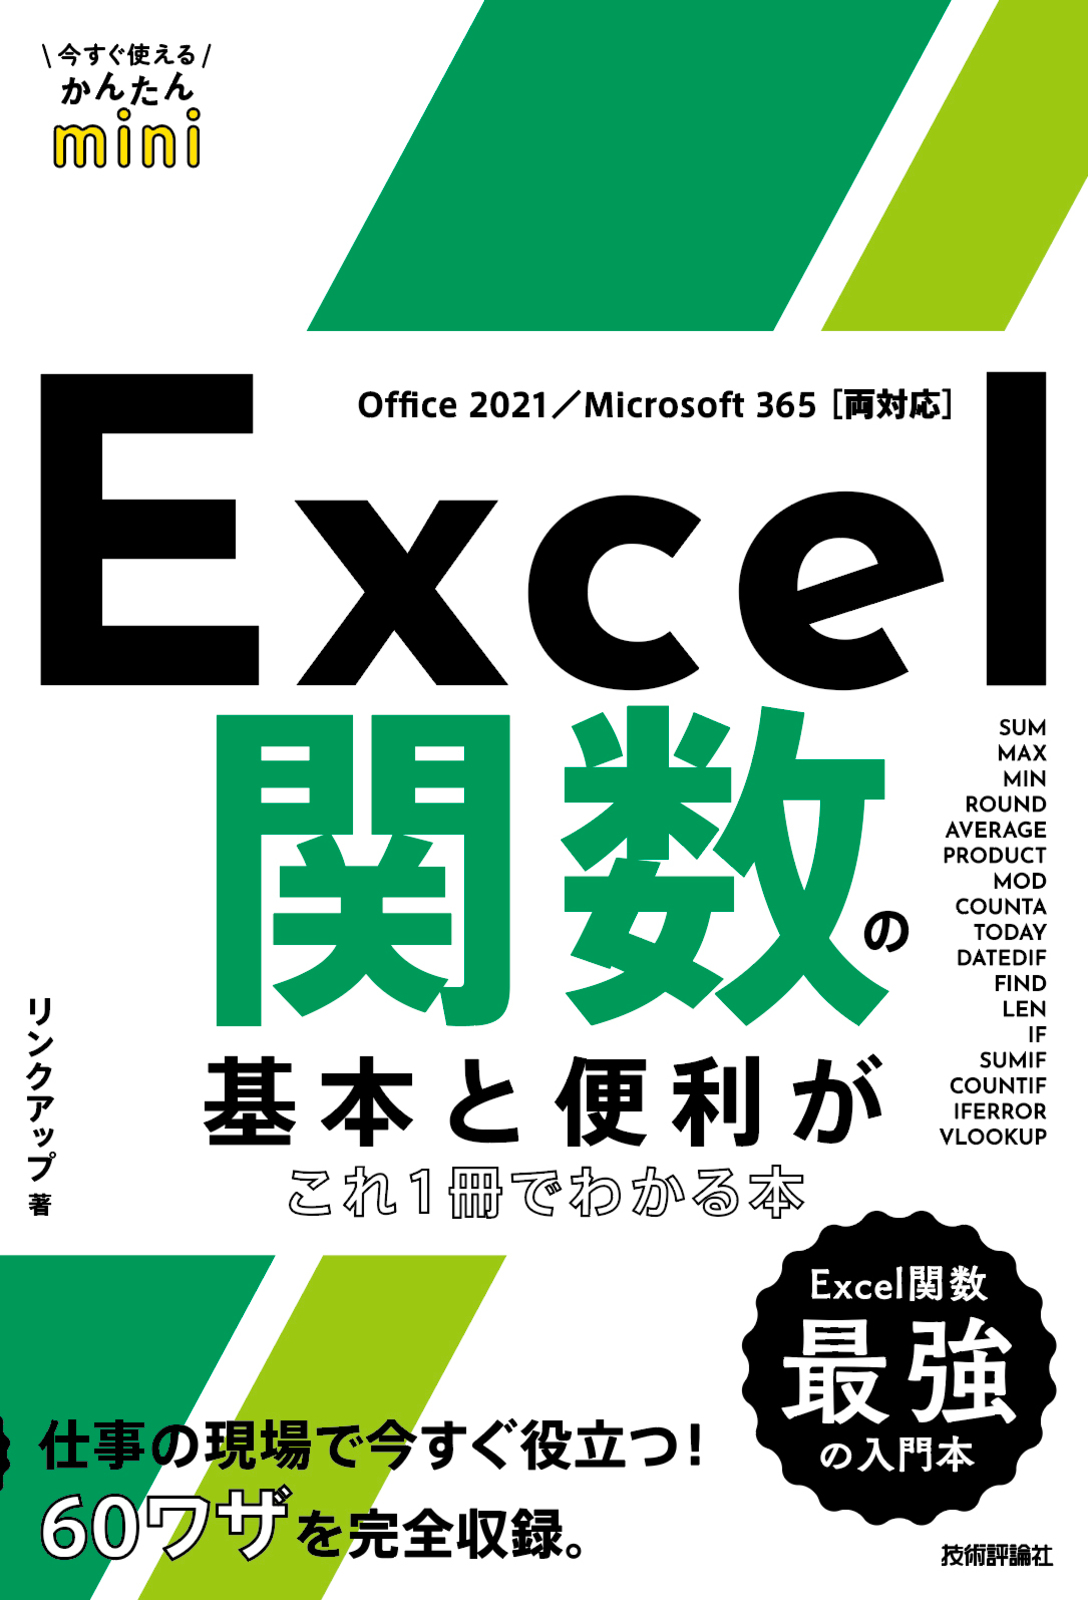 2021/Microsoft　365両対応］：書籍案内｜技術評論社　今すぐ使えるかんたんmini　Excel関数の基本と便利がこれ1冊でわかる本［Office